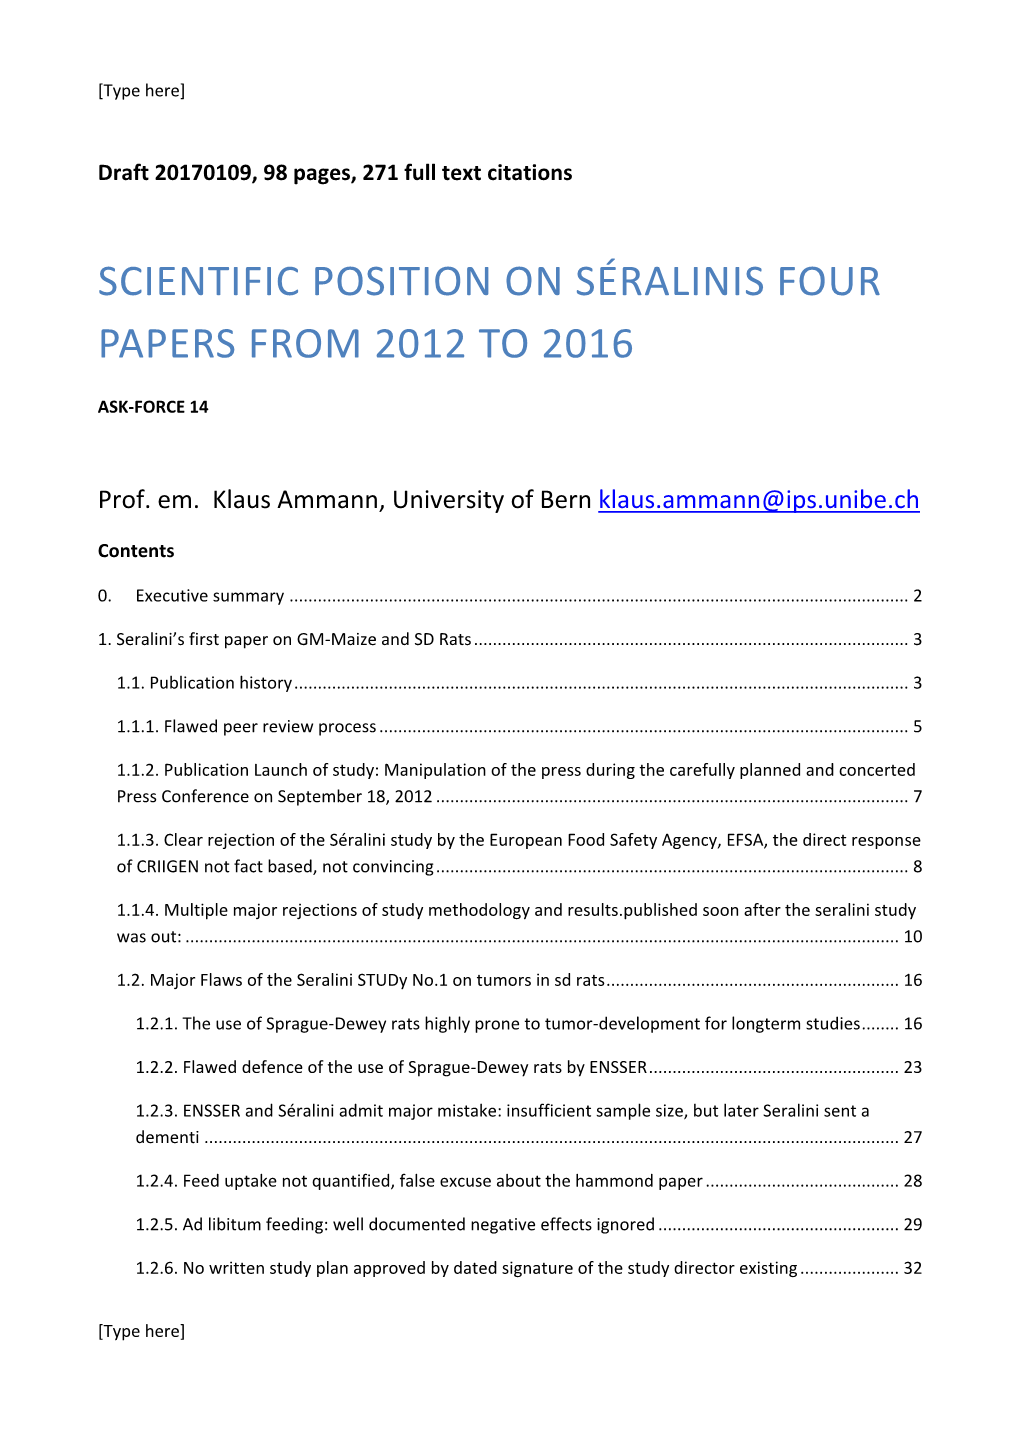 Scientific Position on Séralinis Four Papers from 2012 to 2016